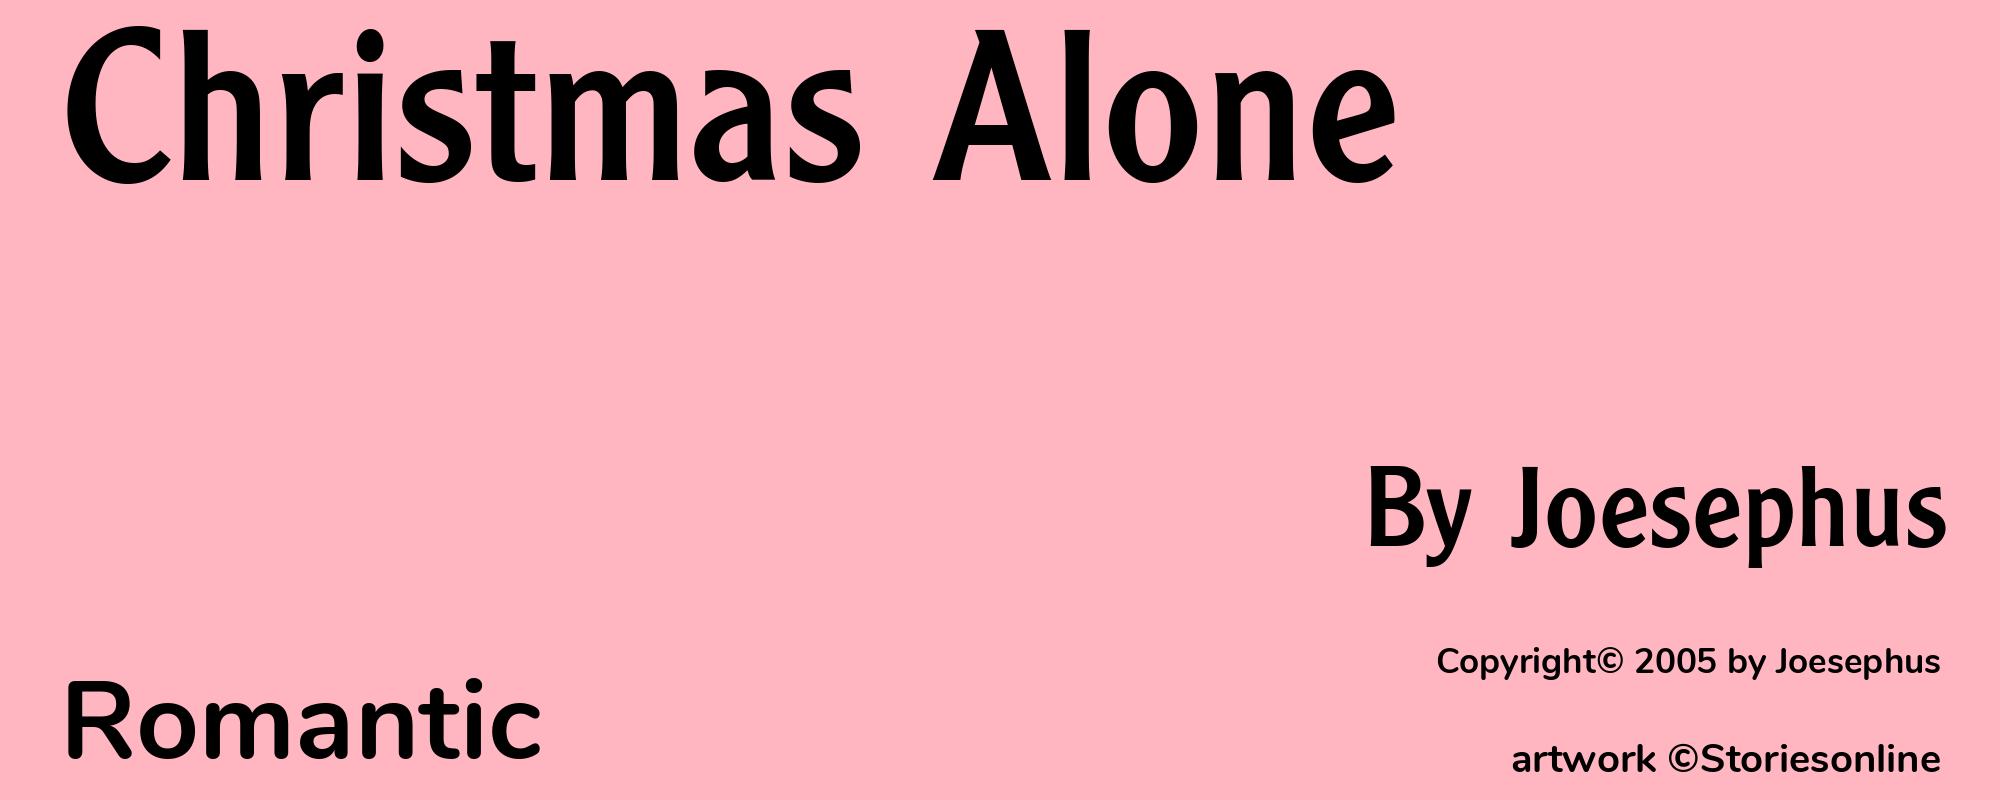 Christmas Alone - Cover